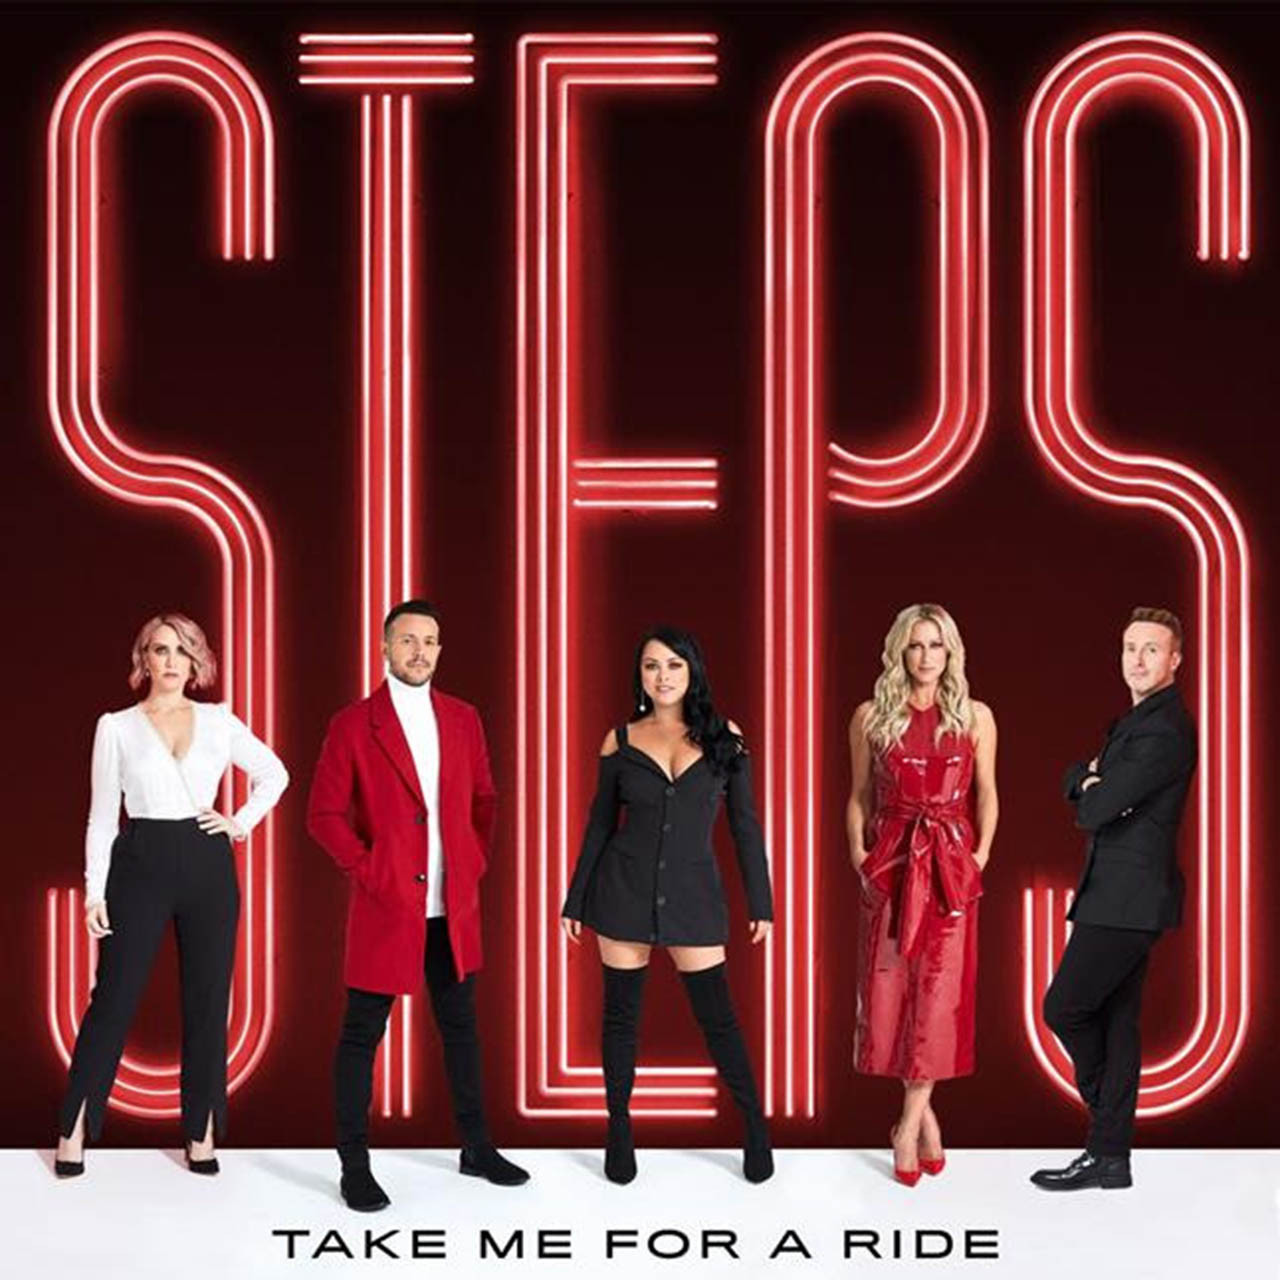 Steps - Take Me for a Ride